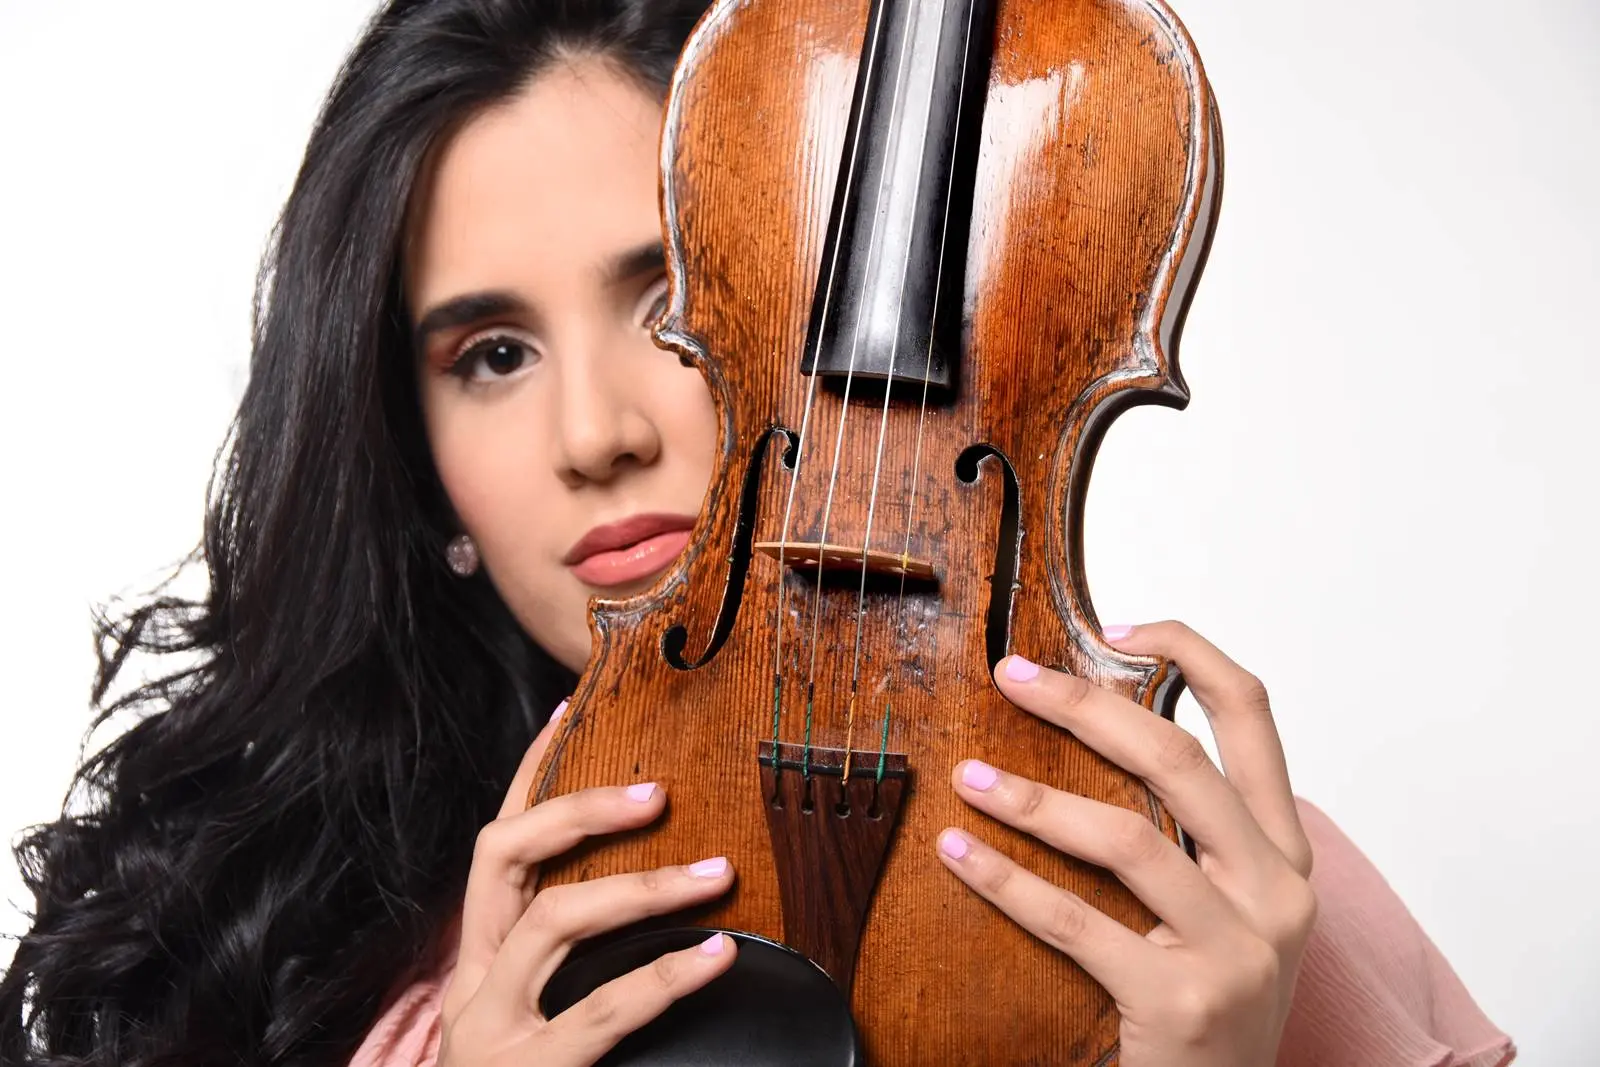 aisha syed violin - Who is the violin player in the Dominican Republic